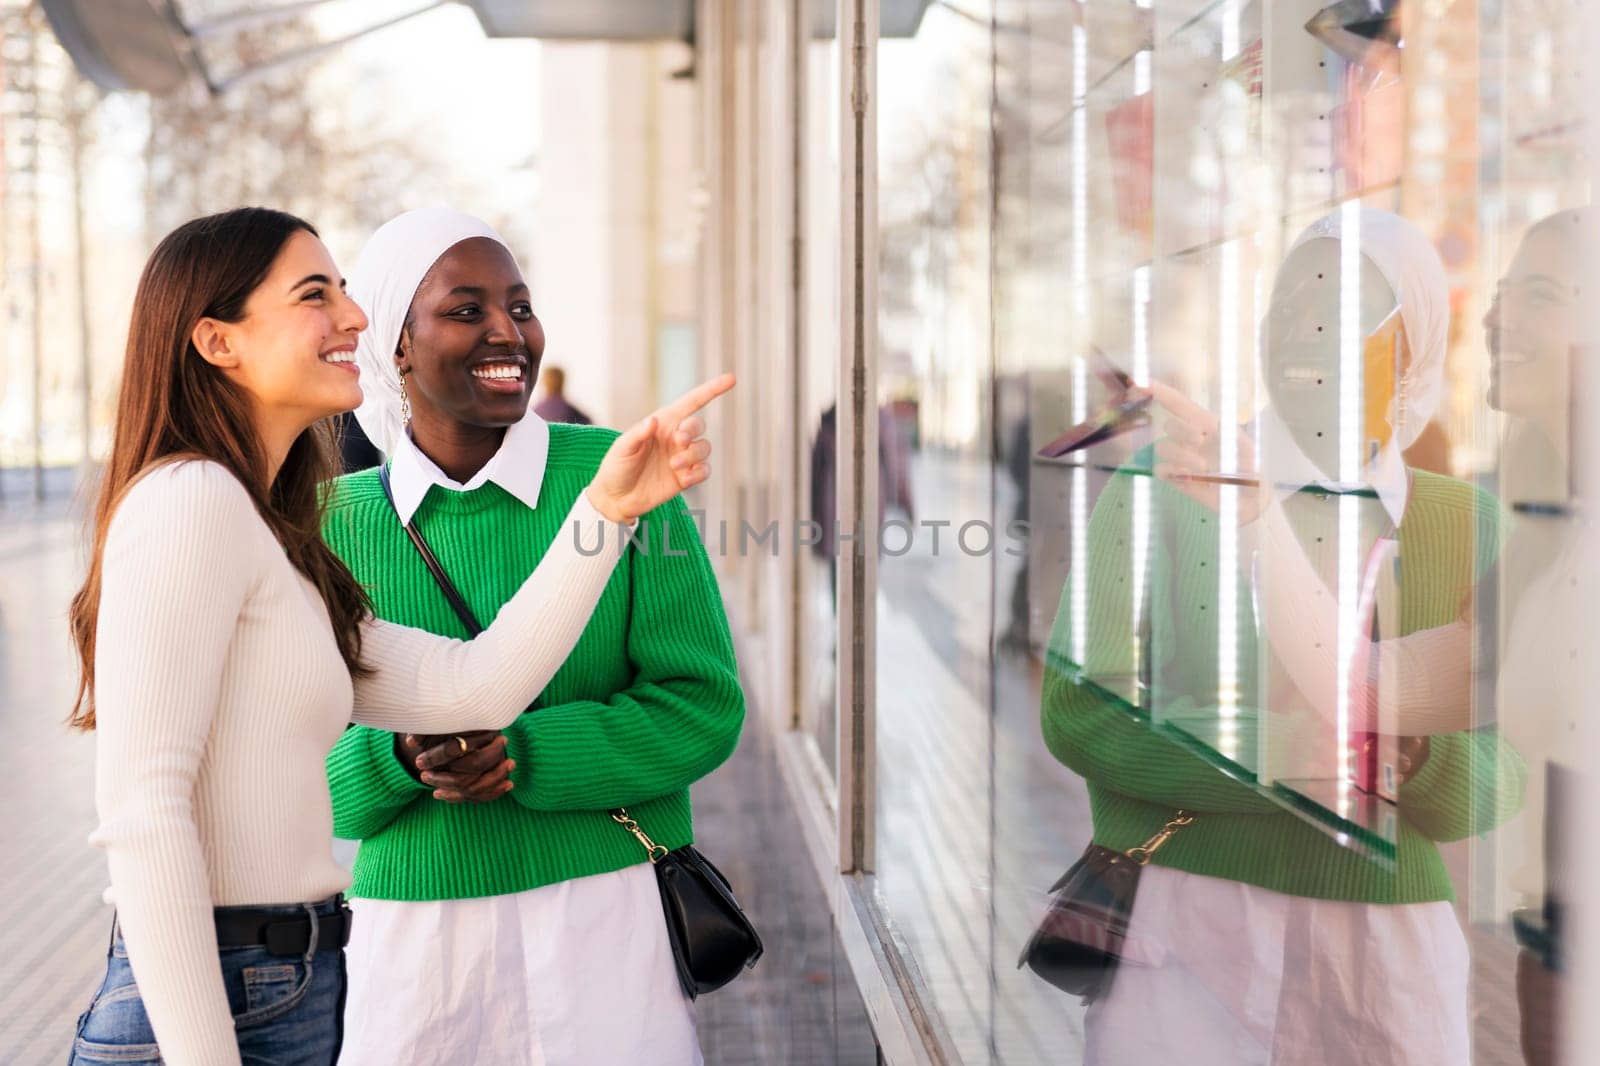 multiracial couple of friends smiling happy looking at a shop window, friendship and modern lifestyle concept, copy space for text